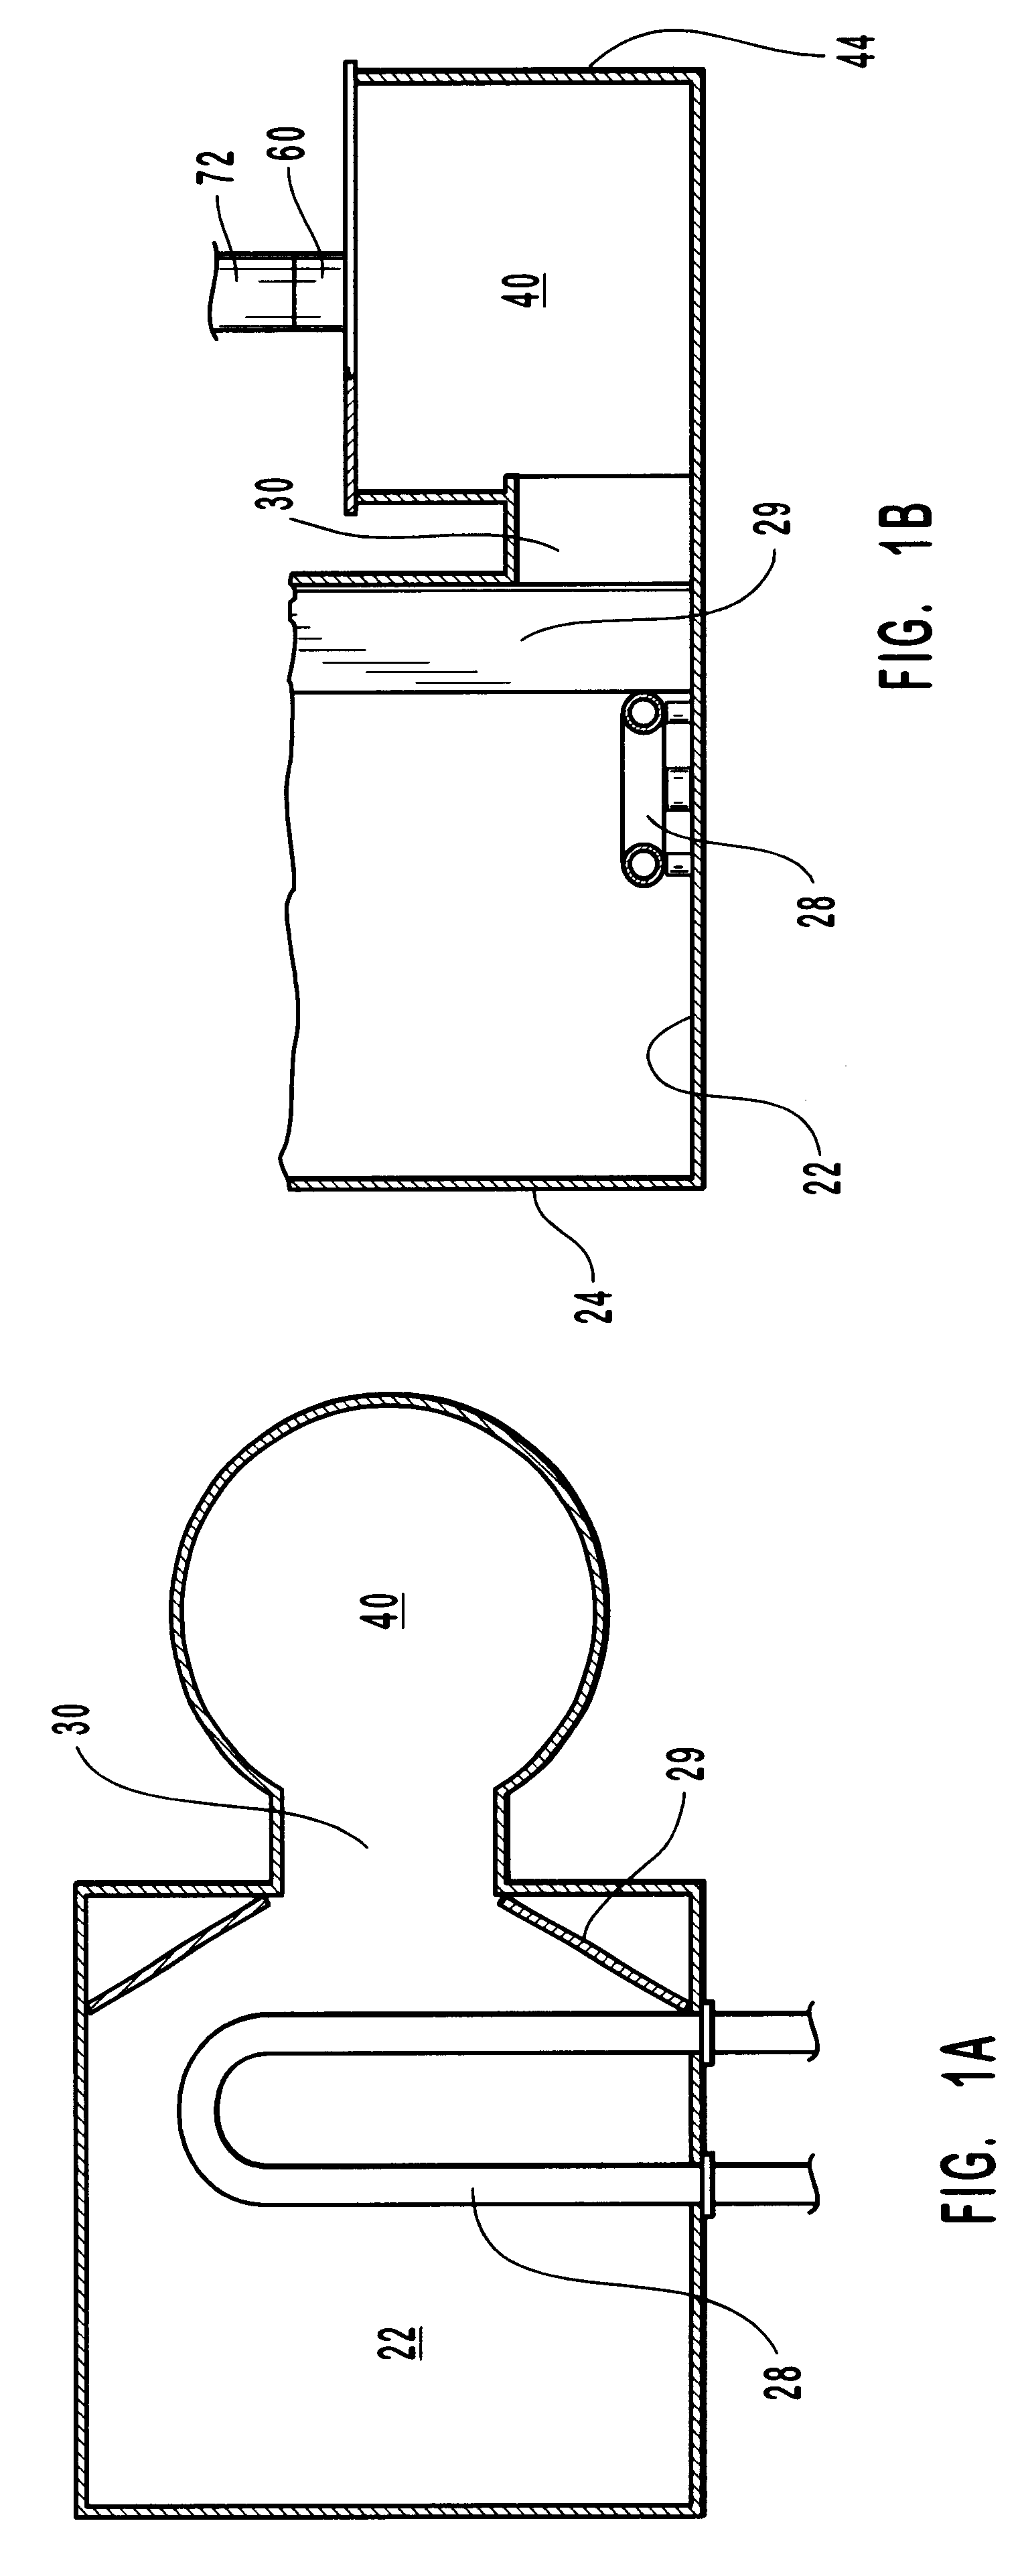 Method and apparatus for introducing sulphur dioxide into aqueous solutions